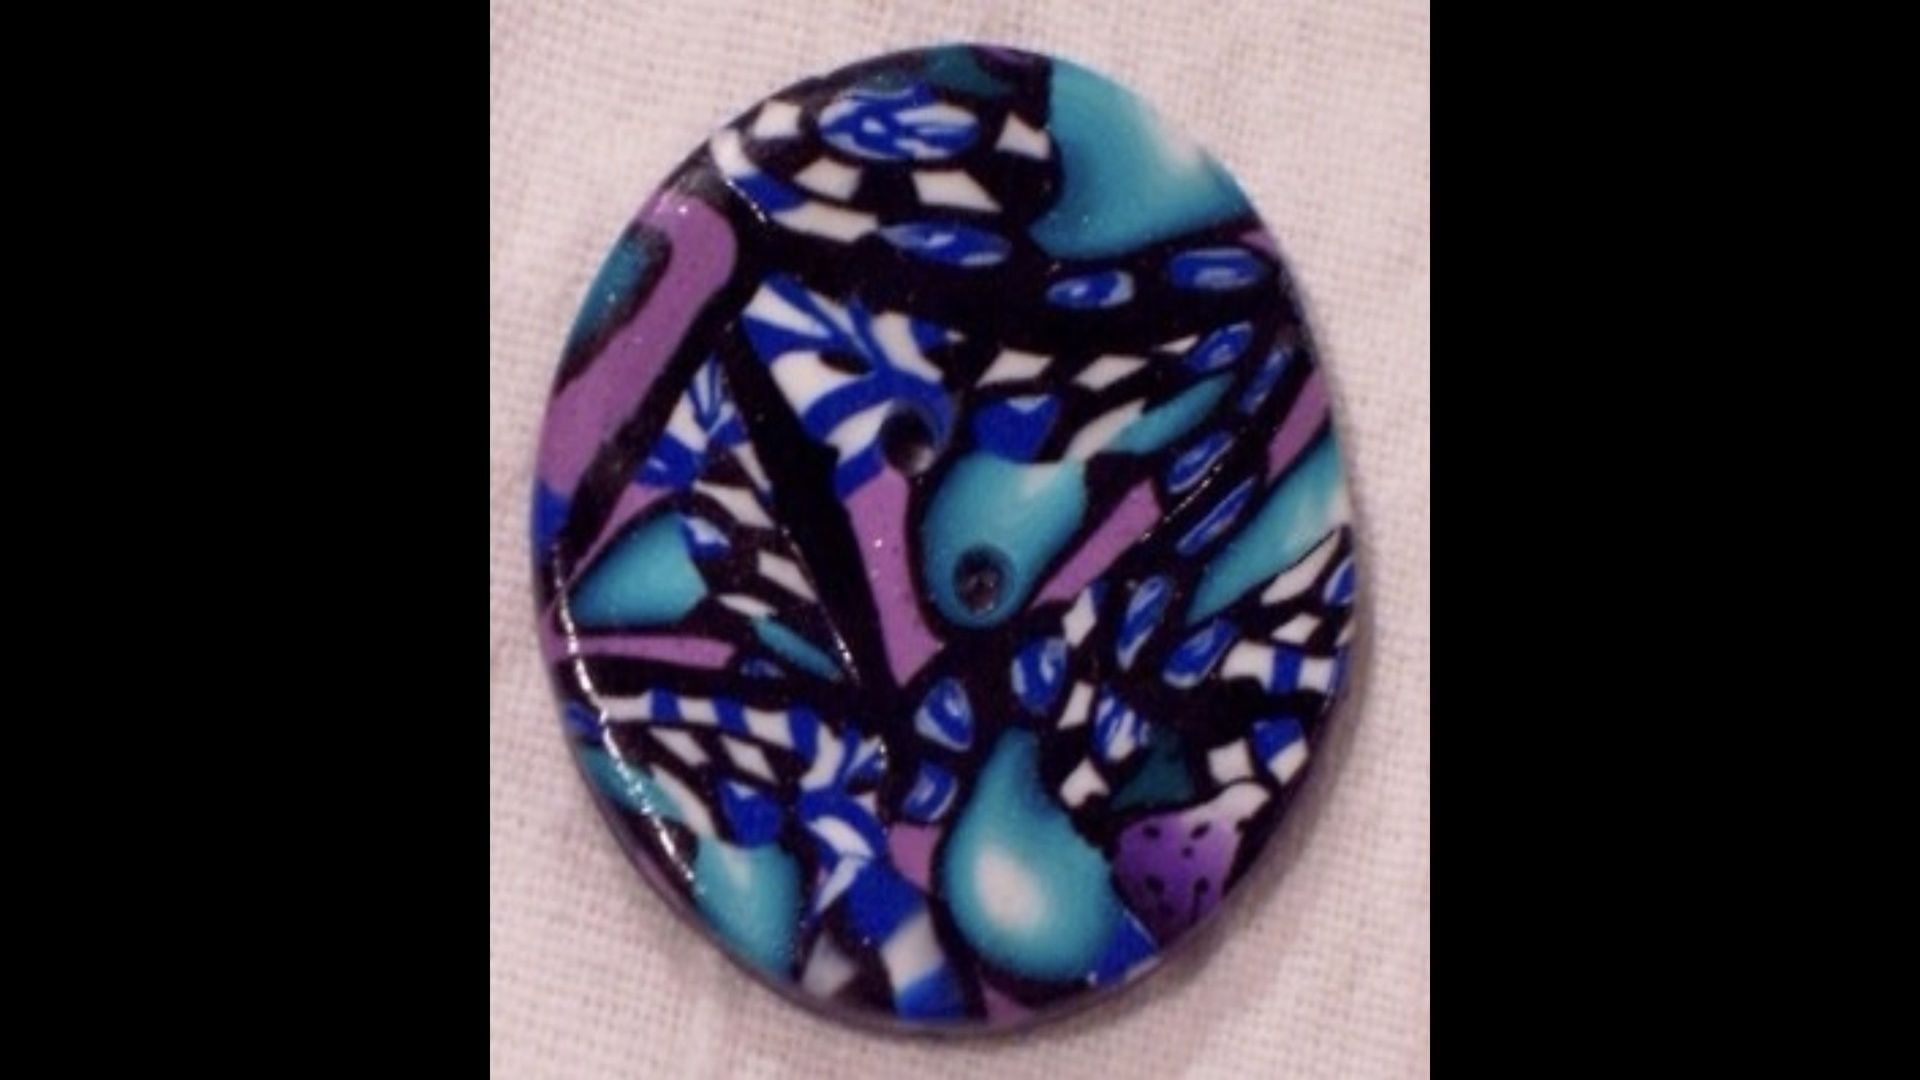 Polymer Clay Class with Ann Pastucha, Knoxville, Illinois, United States